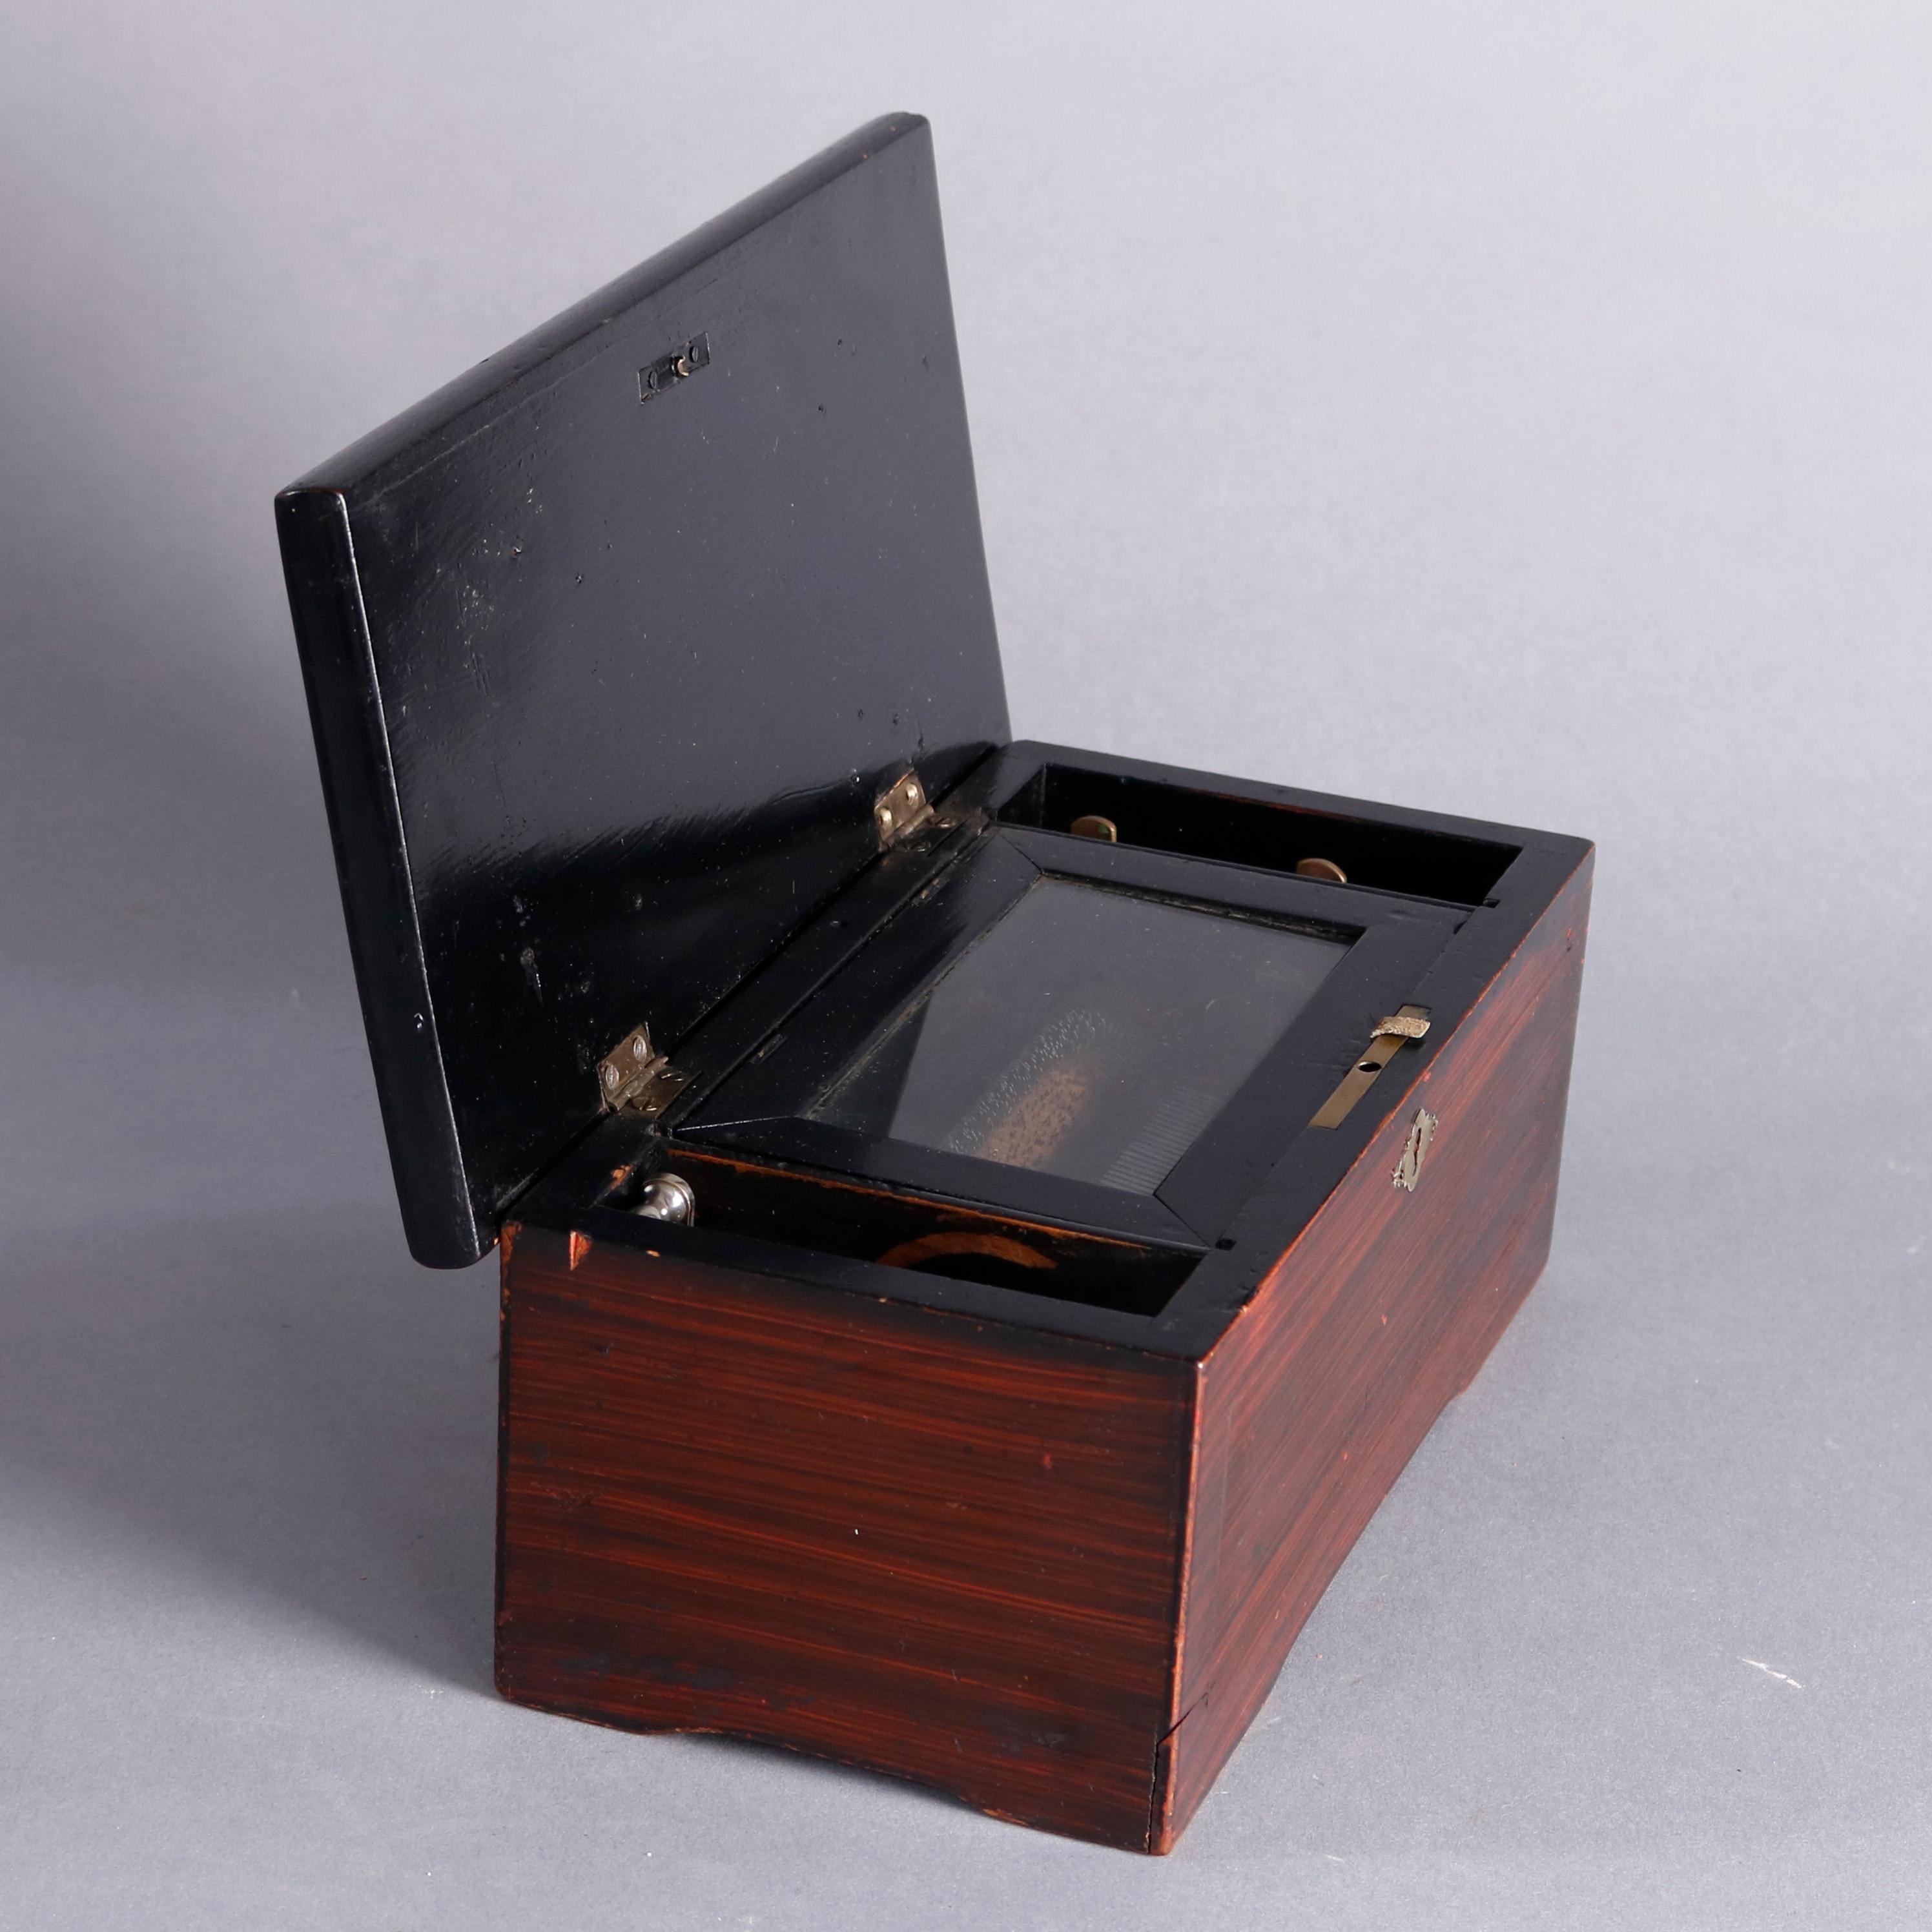 An antique Swiss petite cylinder music box offers grain painted case with top opening to reveal glass covered works, in working order, circa 1890

Measures: 4.75